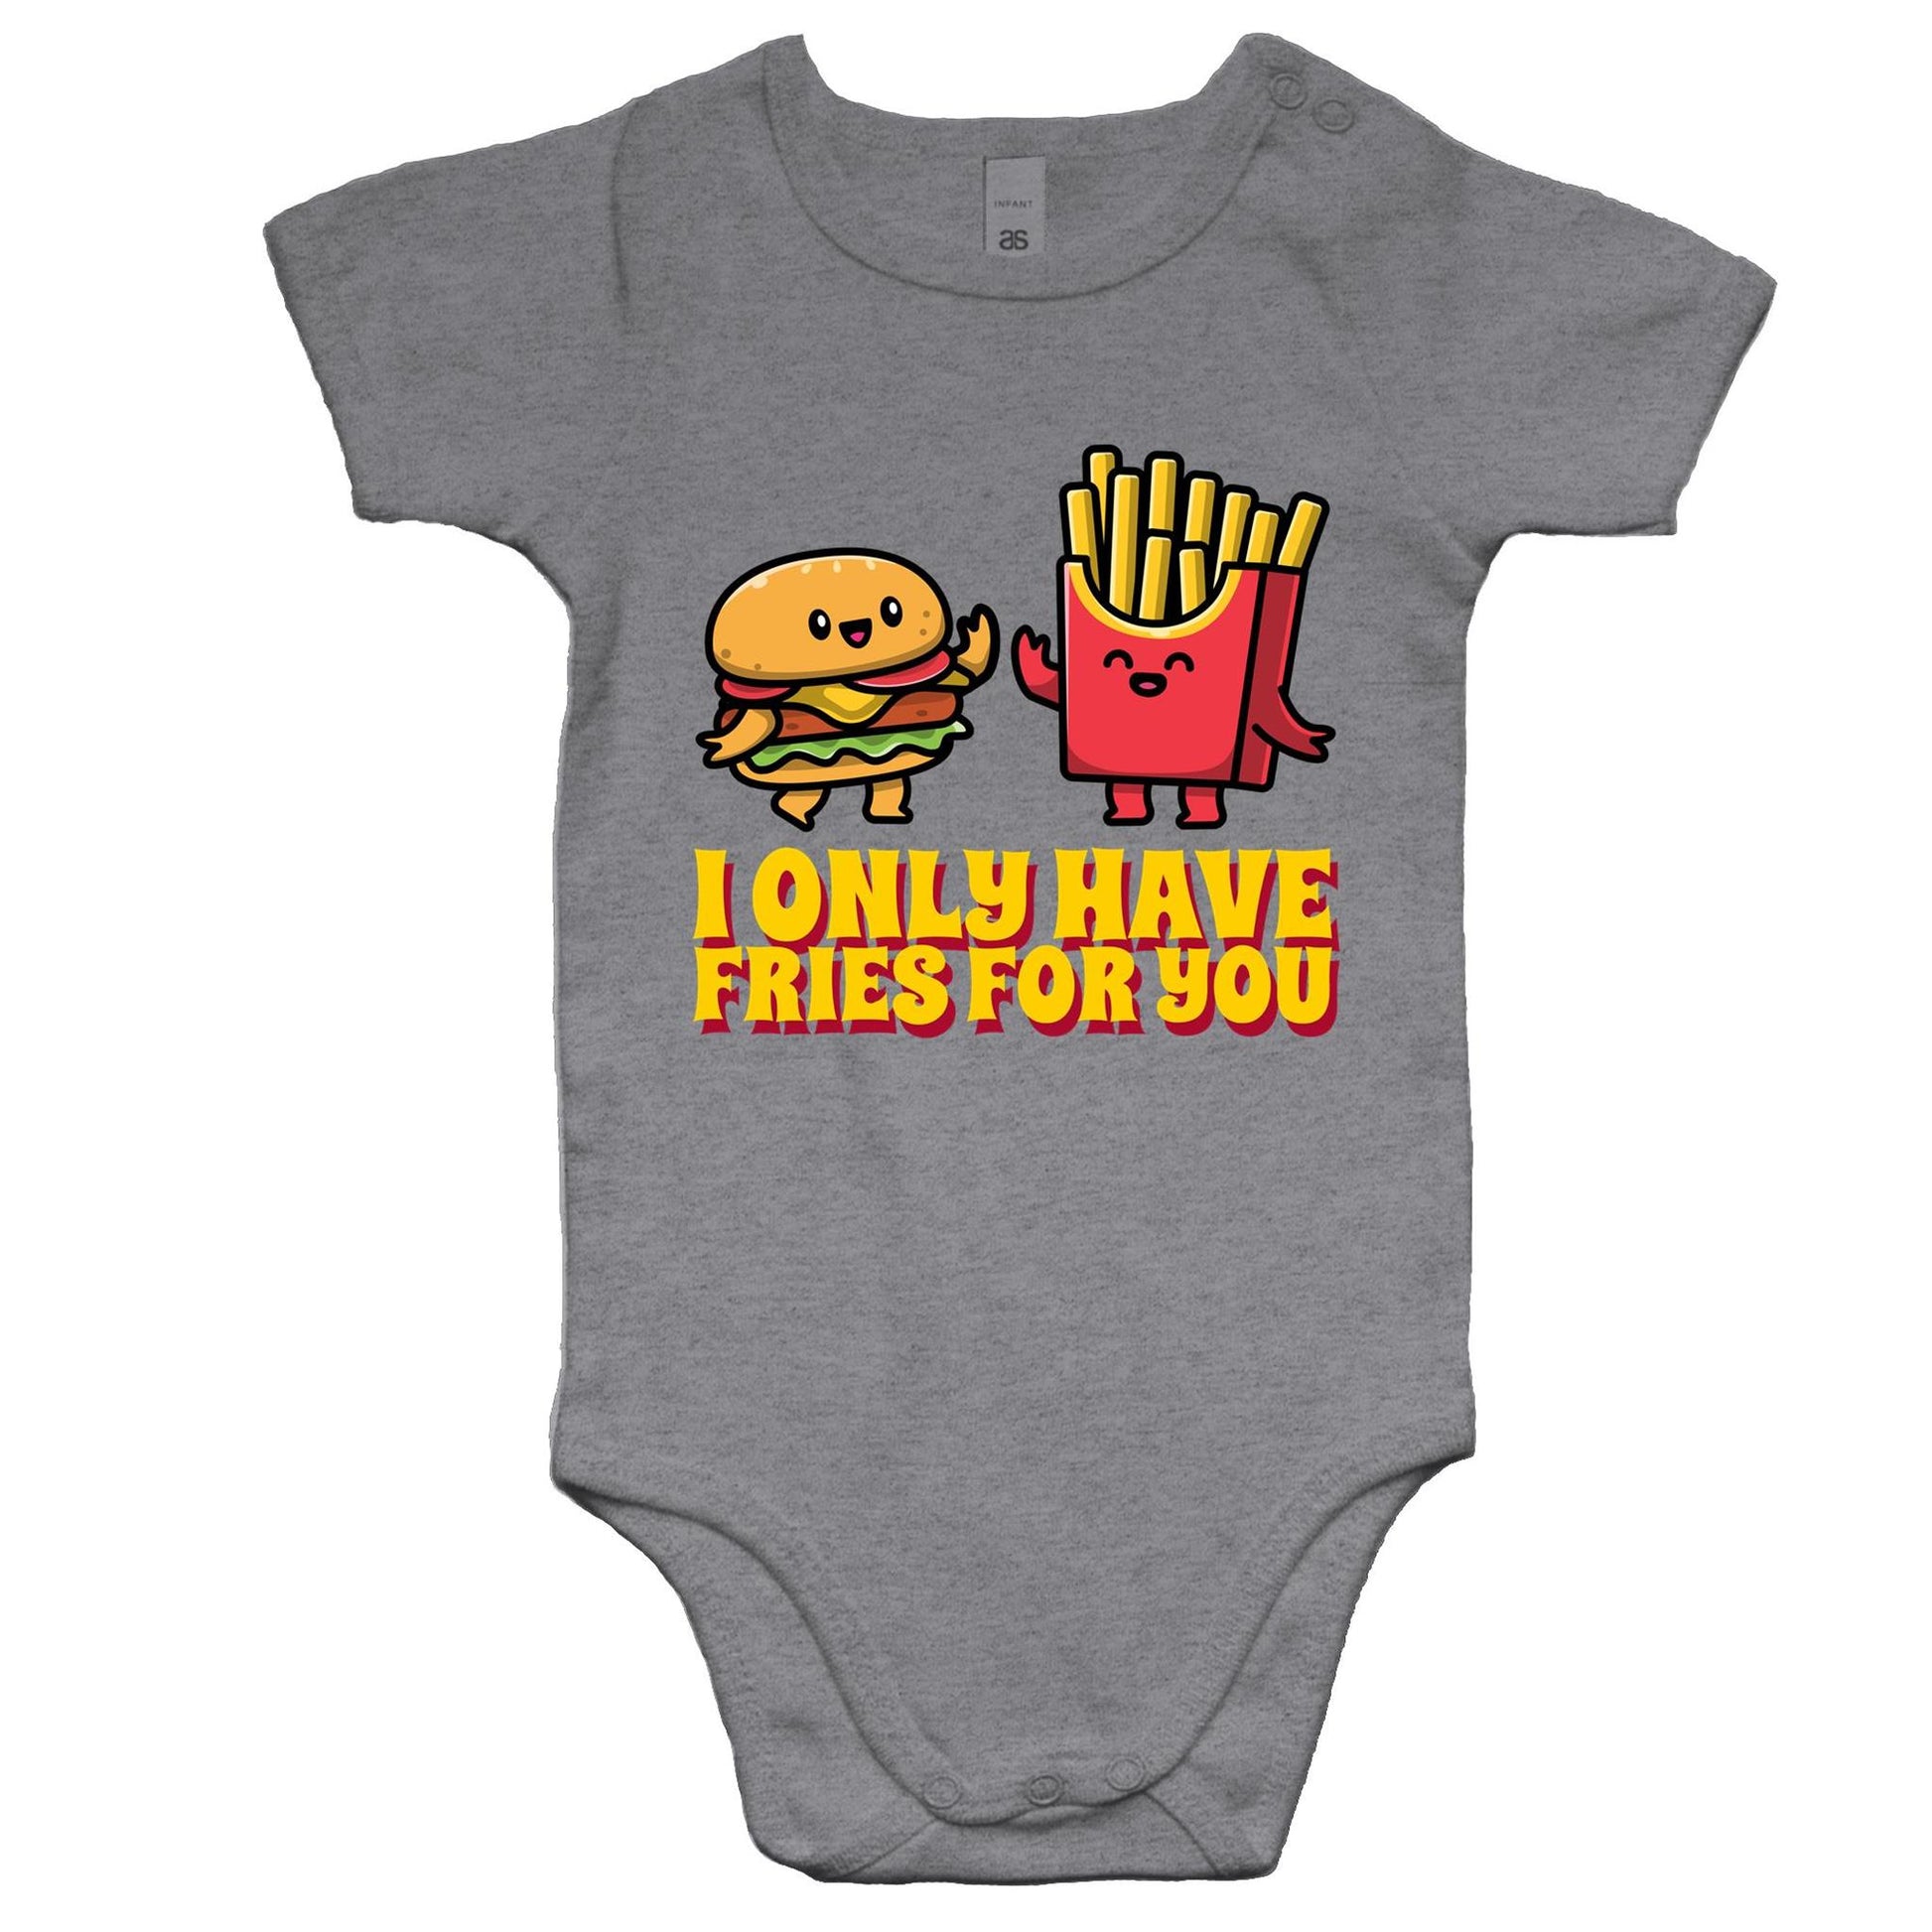 I Only Have Fries For You, Burger And Fries - Baby Bodysuit Grey Marle Baby Bodysuit